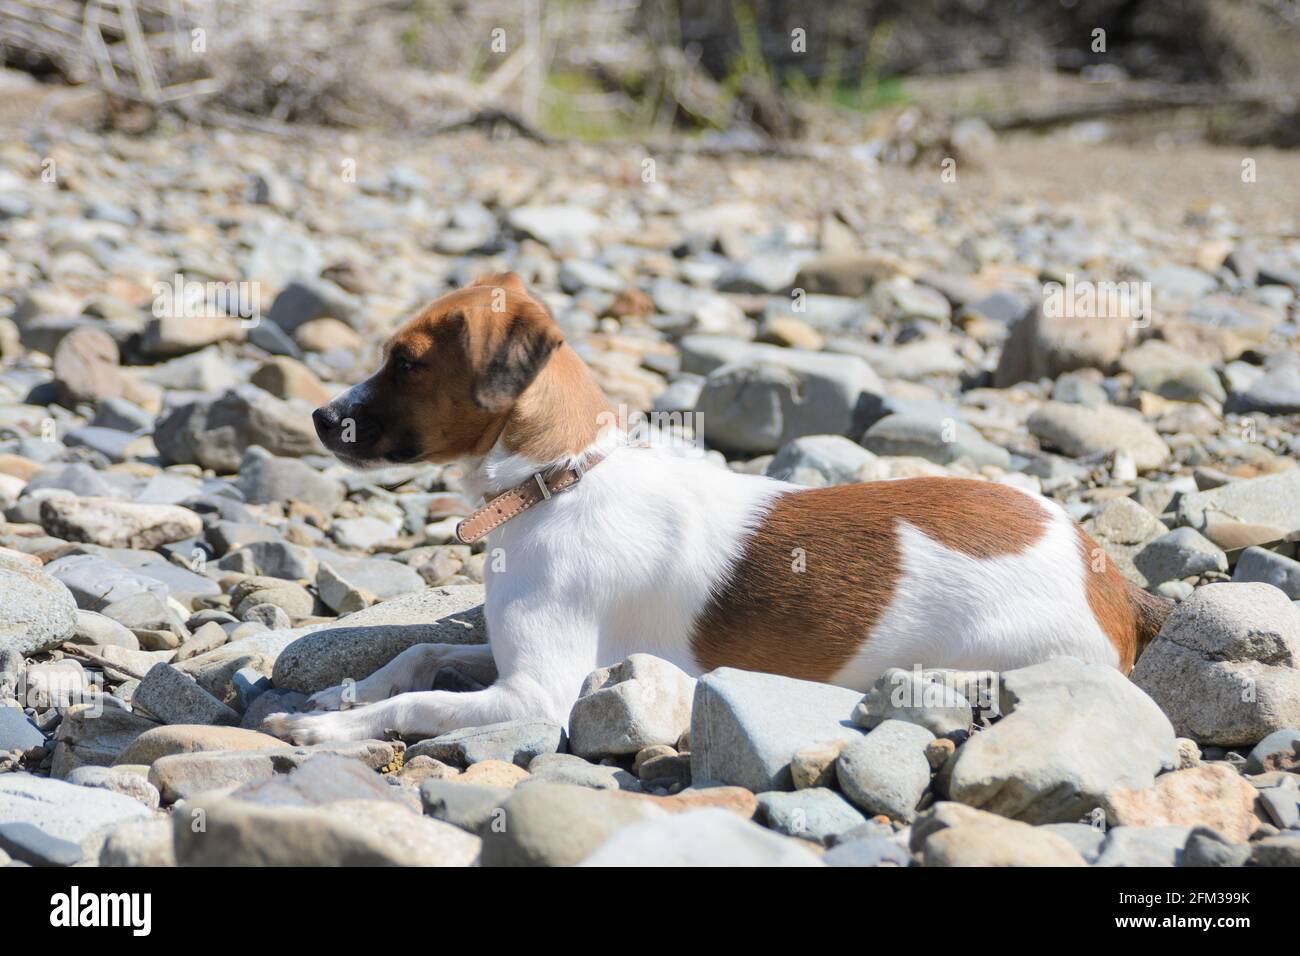 A dog of a white-red color lying on warm stones under the sun. Selective focus. Stock Photo